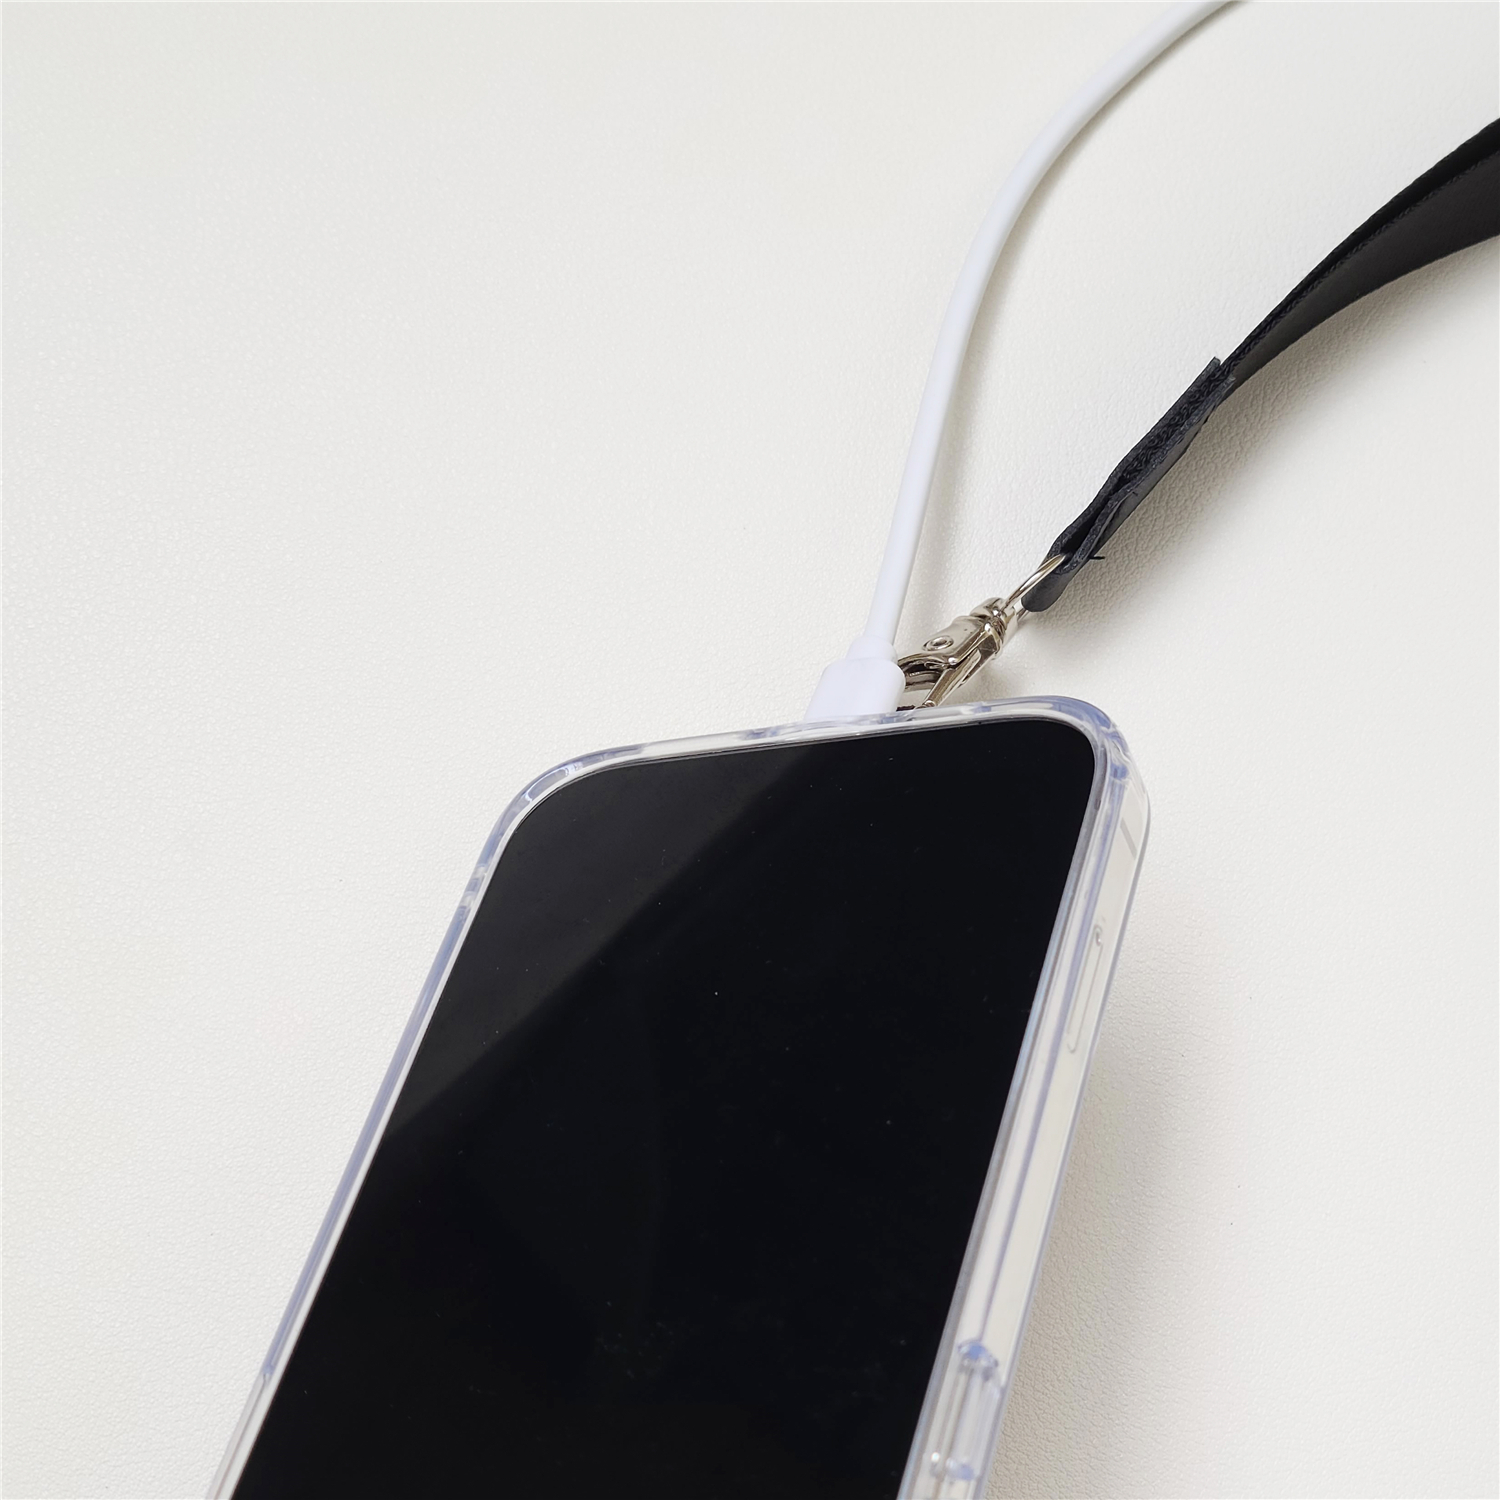 Dureble Mobile Phone Gancio di guarnizione Schede Clip Strong Clip Strong Clip Spacco Snap Hang Crow Cord Rope Patch